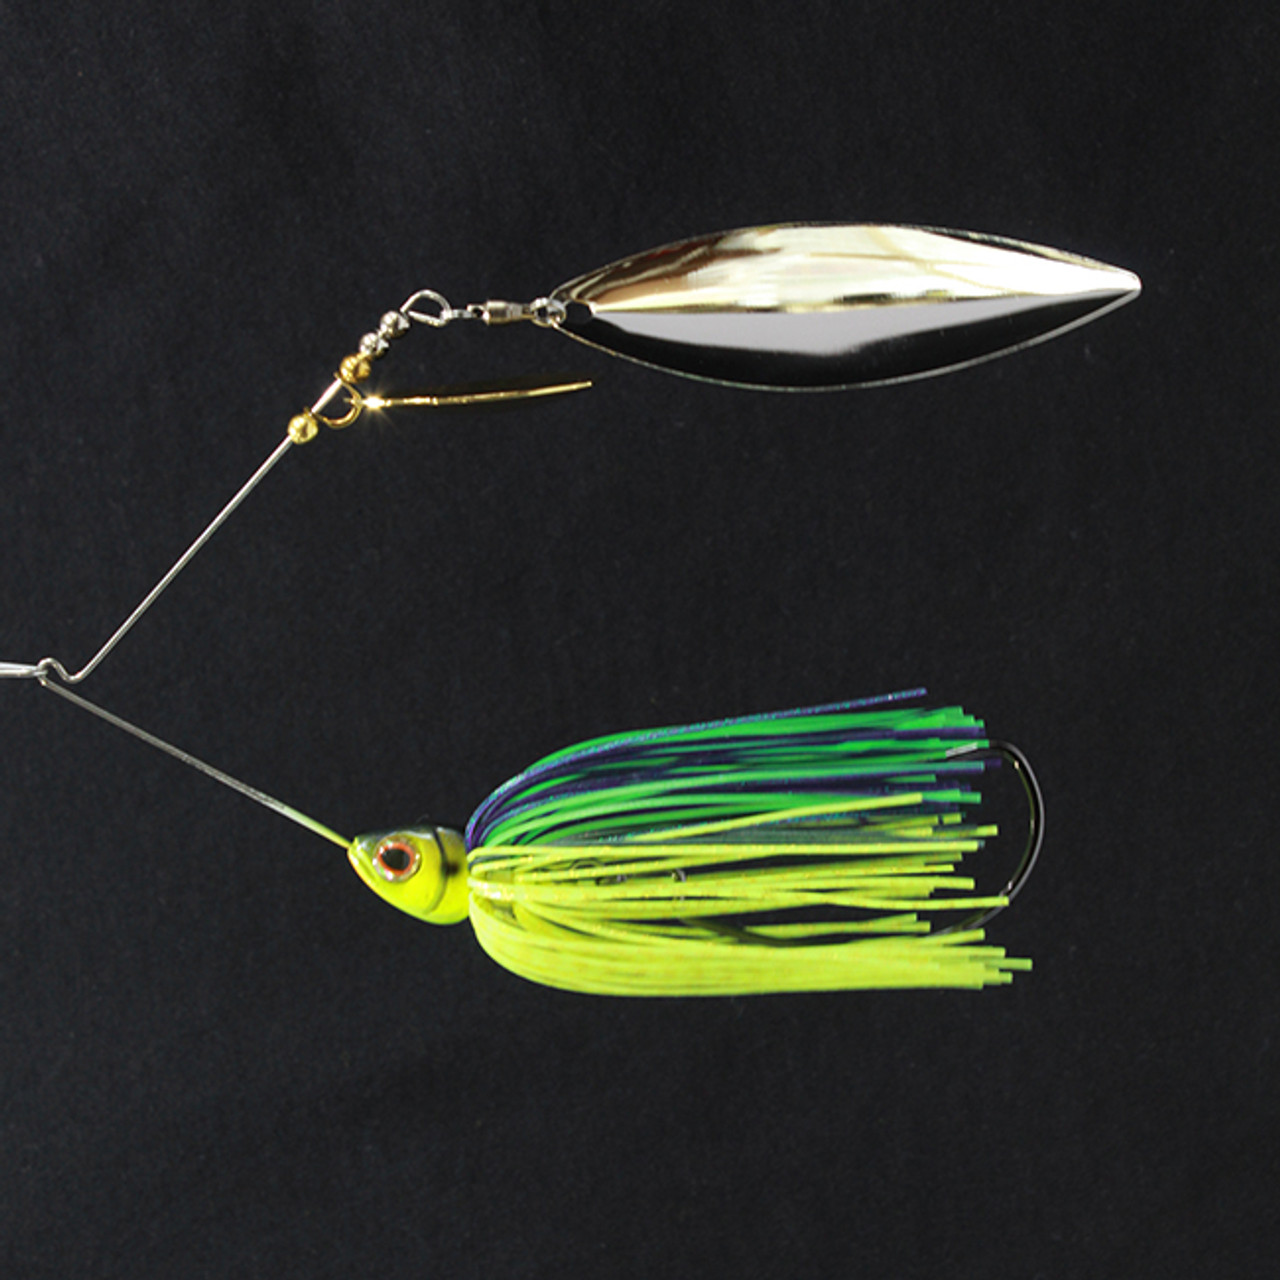 Glamour Shad 1/4 oz. Double Willow Spinnerbait — Glamour Shad Store